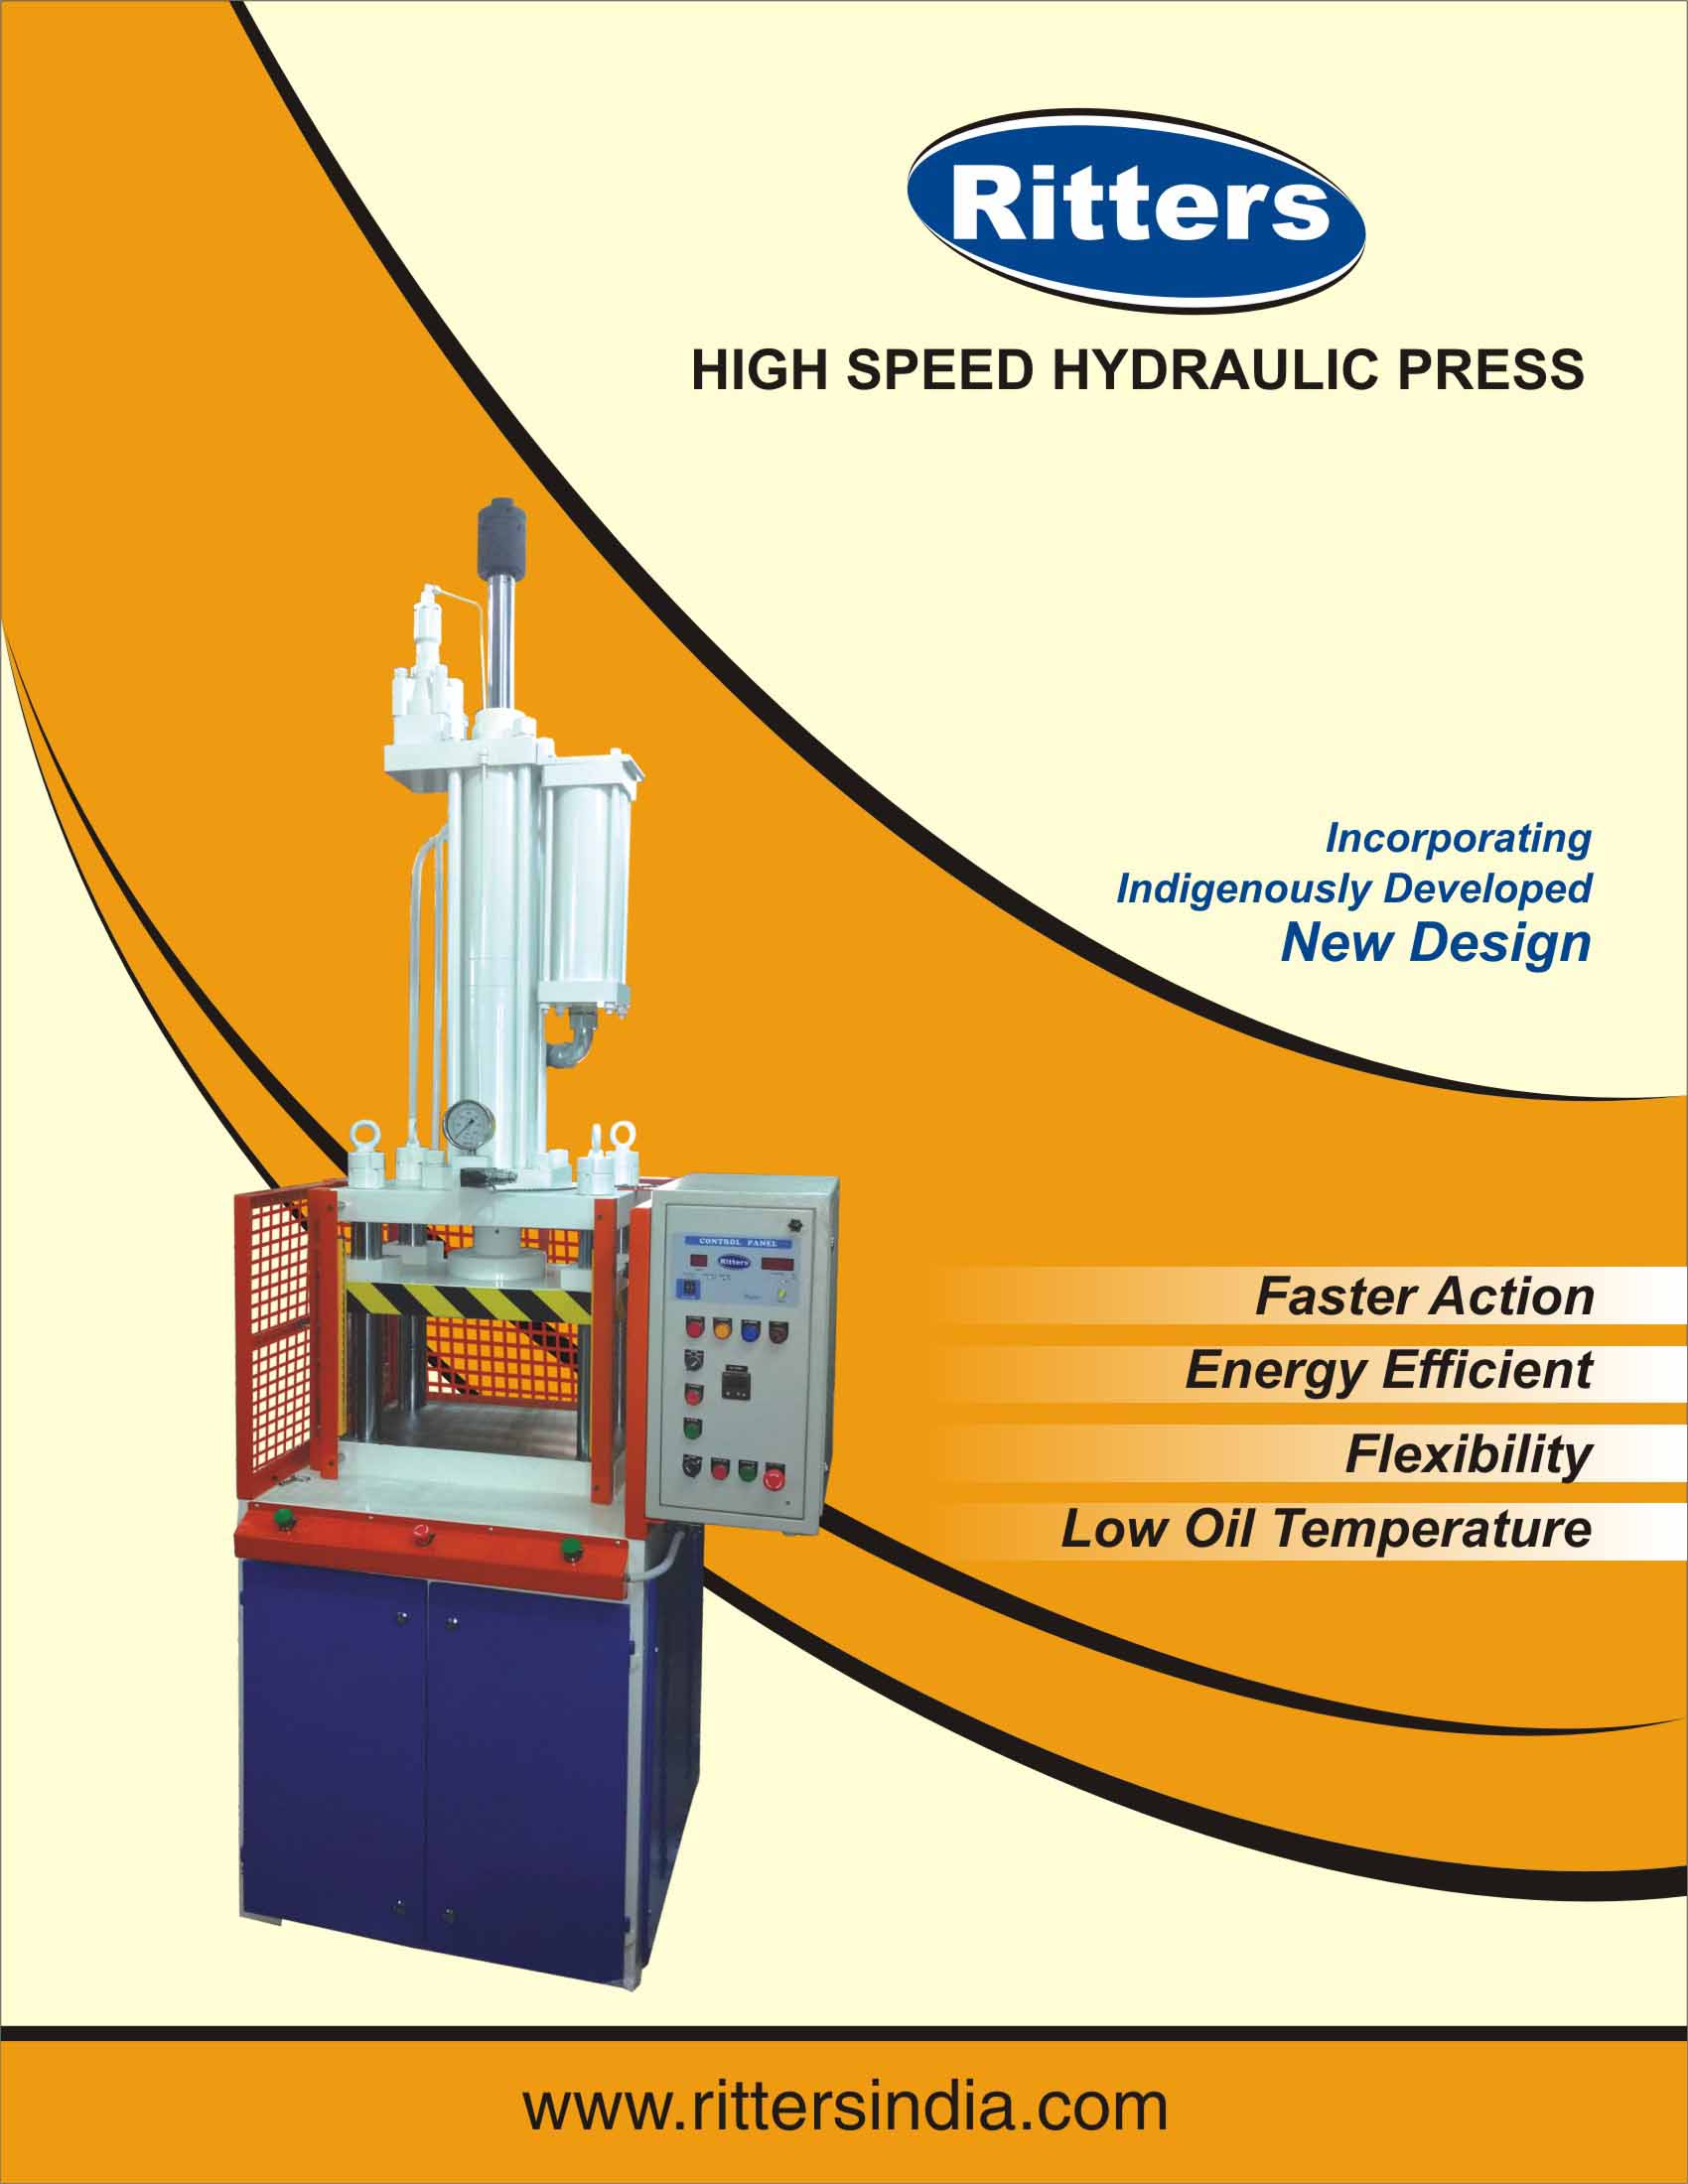 Just Launched New Indigenously & Innovatively Designed High Speed Compact Hydraulic Press